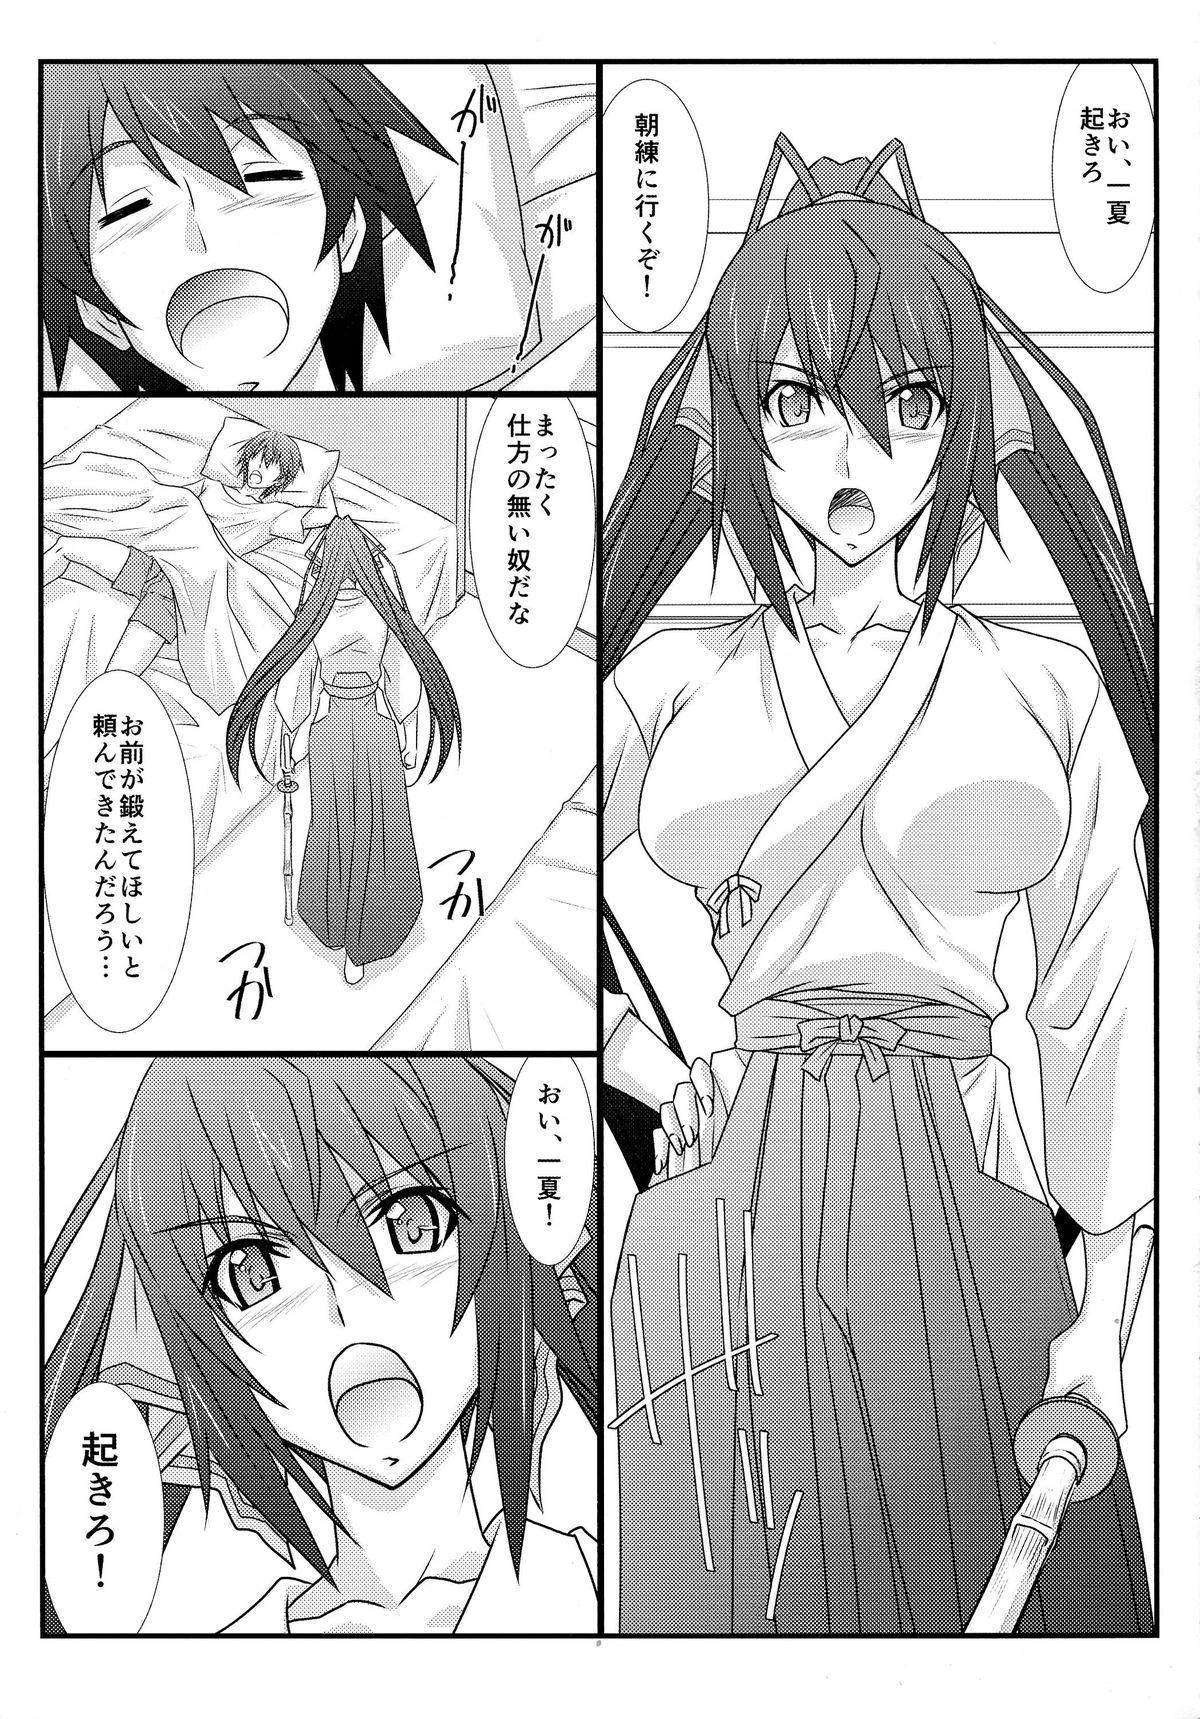 Edging Astral Bout Ver. 27 - Infinite stratos Spanking - Page 4